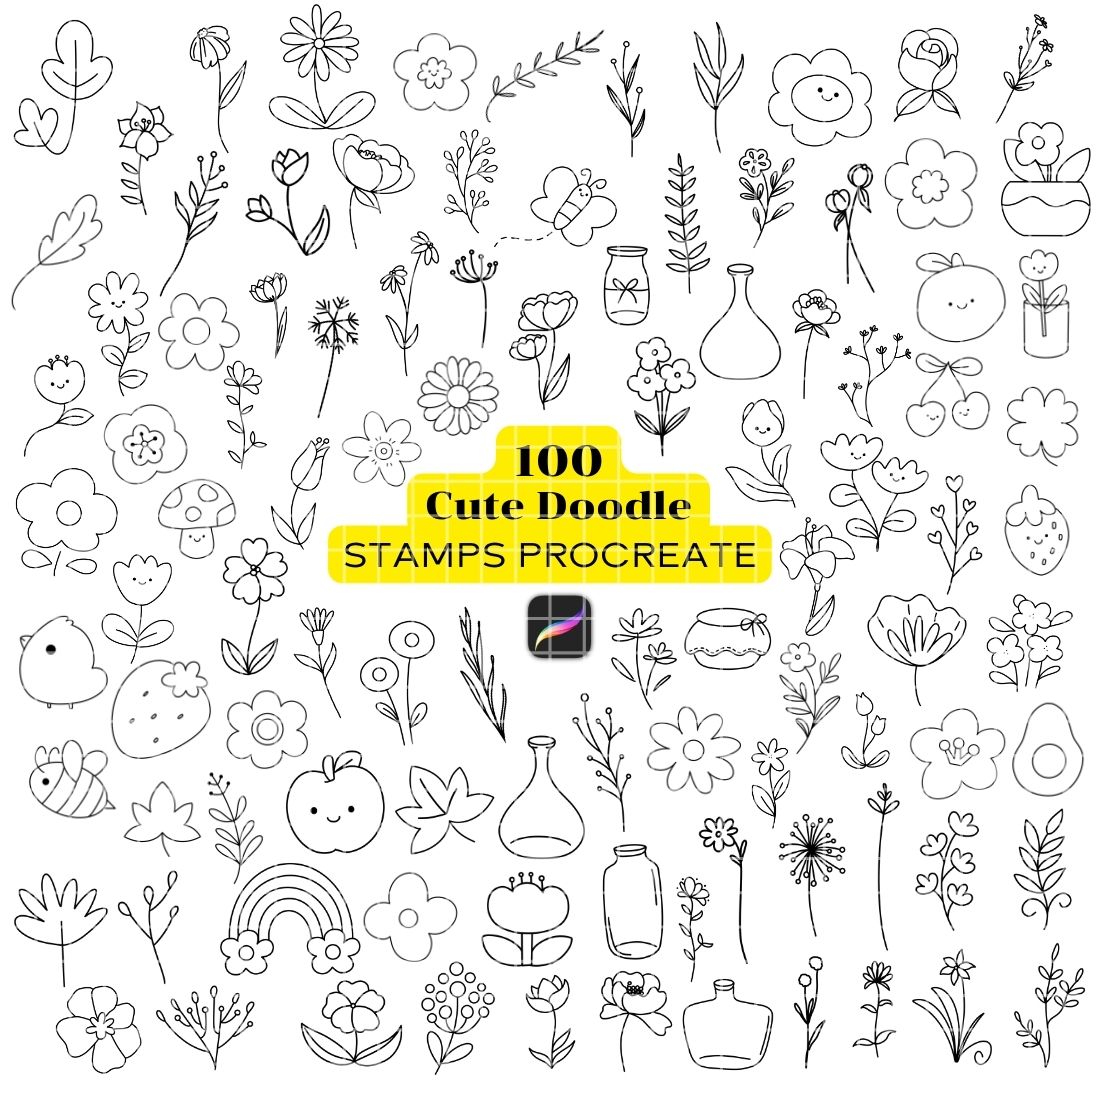 100 Cute Doodle Stamps Procreate cover image.